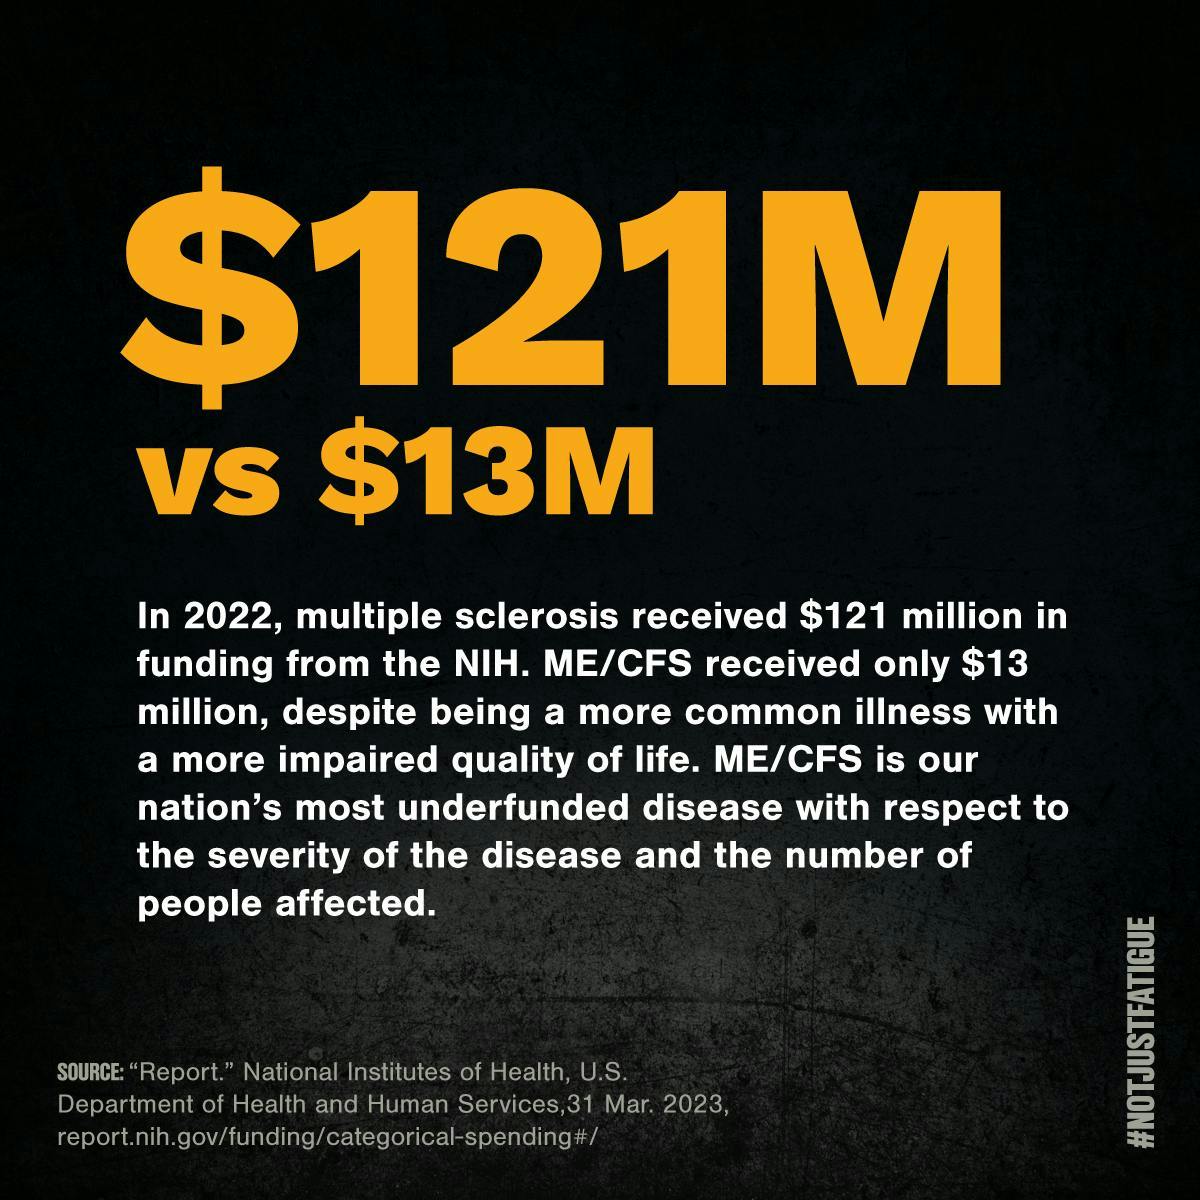 In 2022, multiple sclerosis received $121 million in funding from NIH. ME/CFS received only $13 million, despite being a more common illness with a more impaired quality of life. ME/CFS is our nation's most underfunded disease with respect to severity of the disease and the number of people affected.